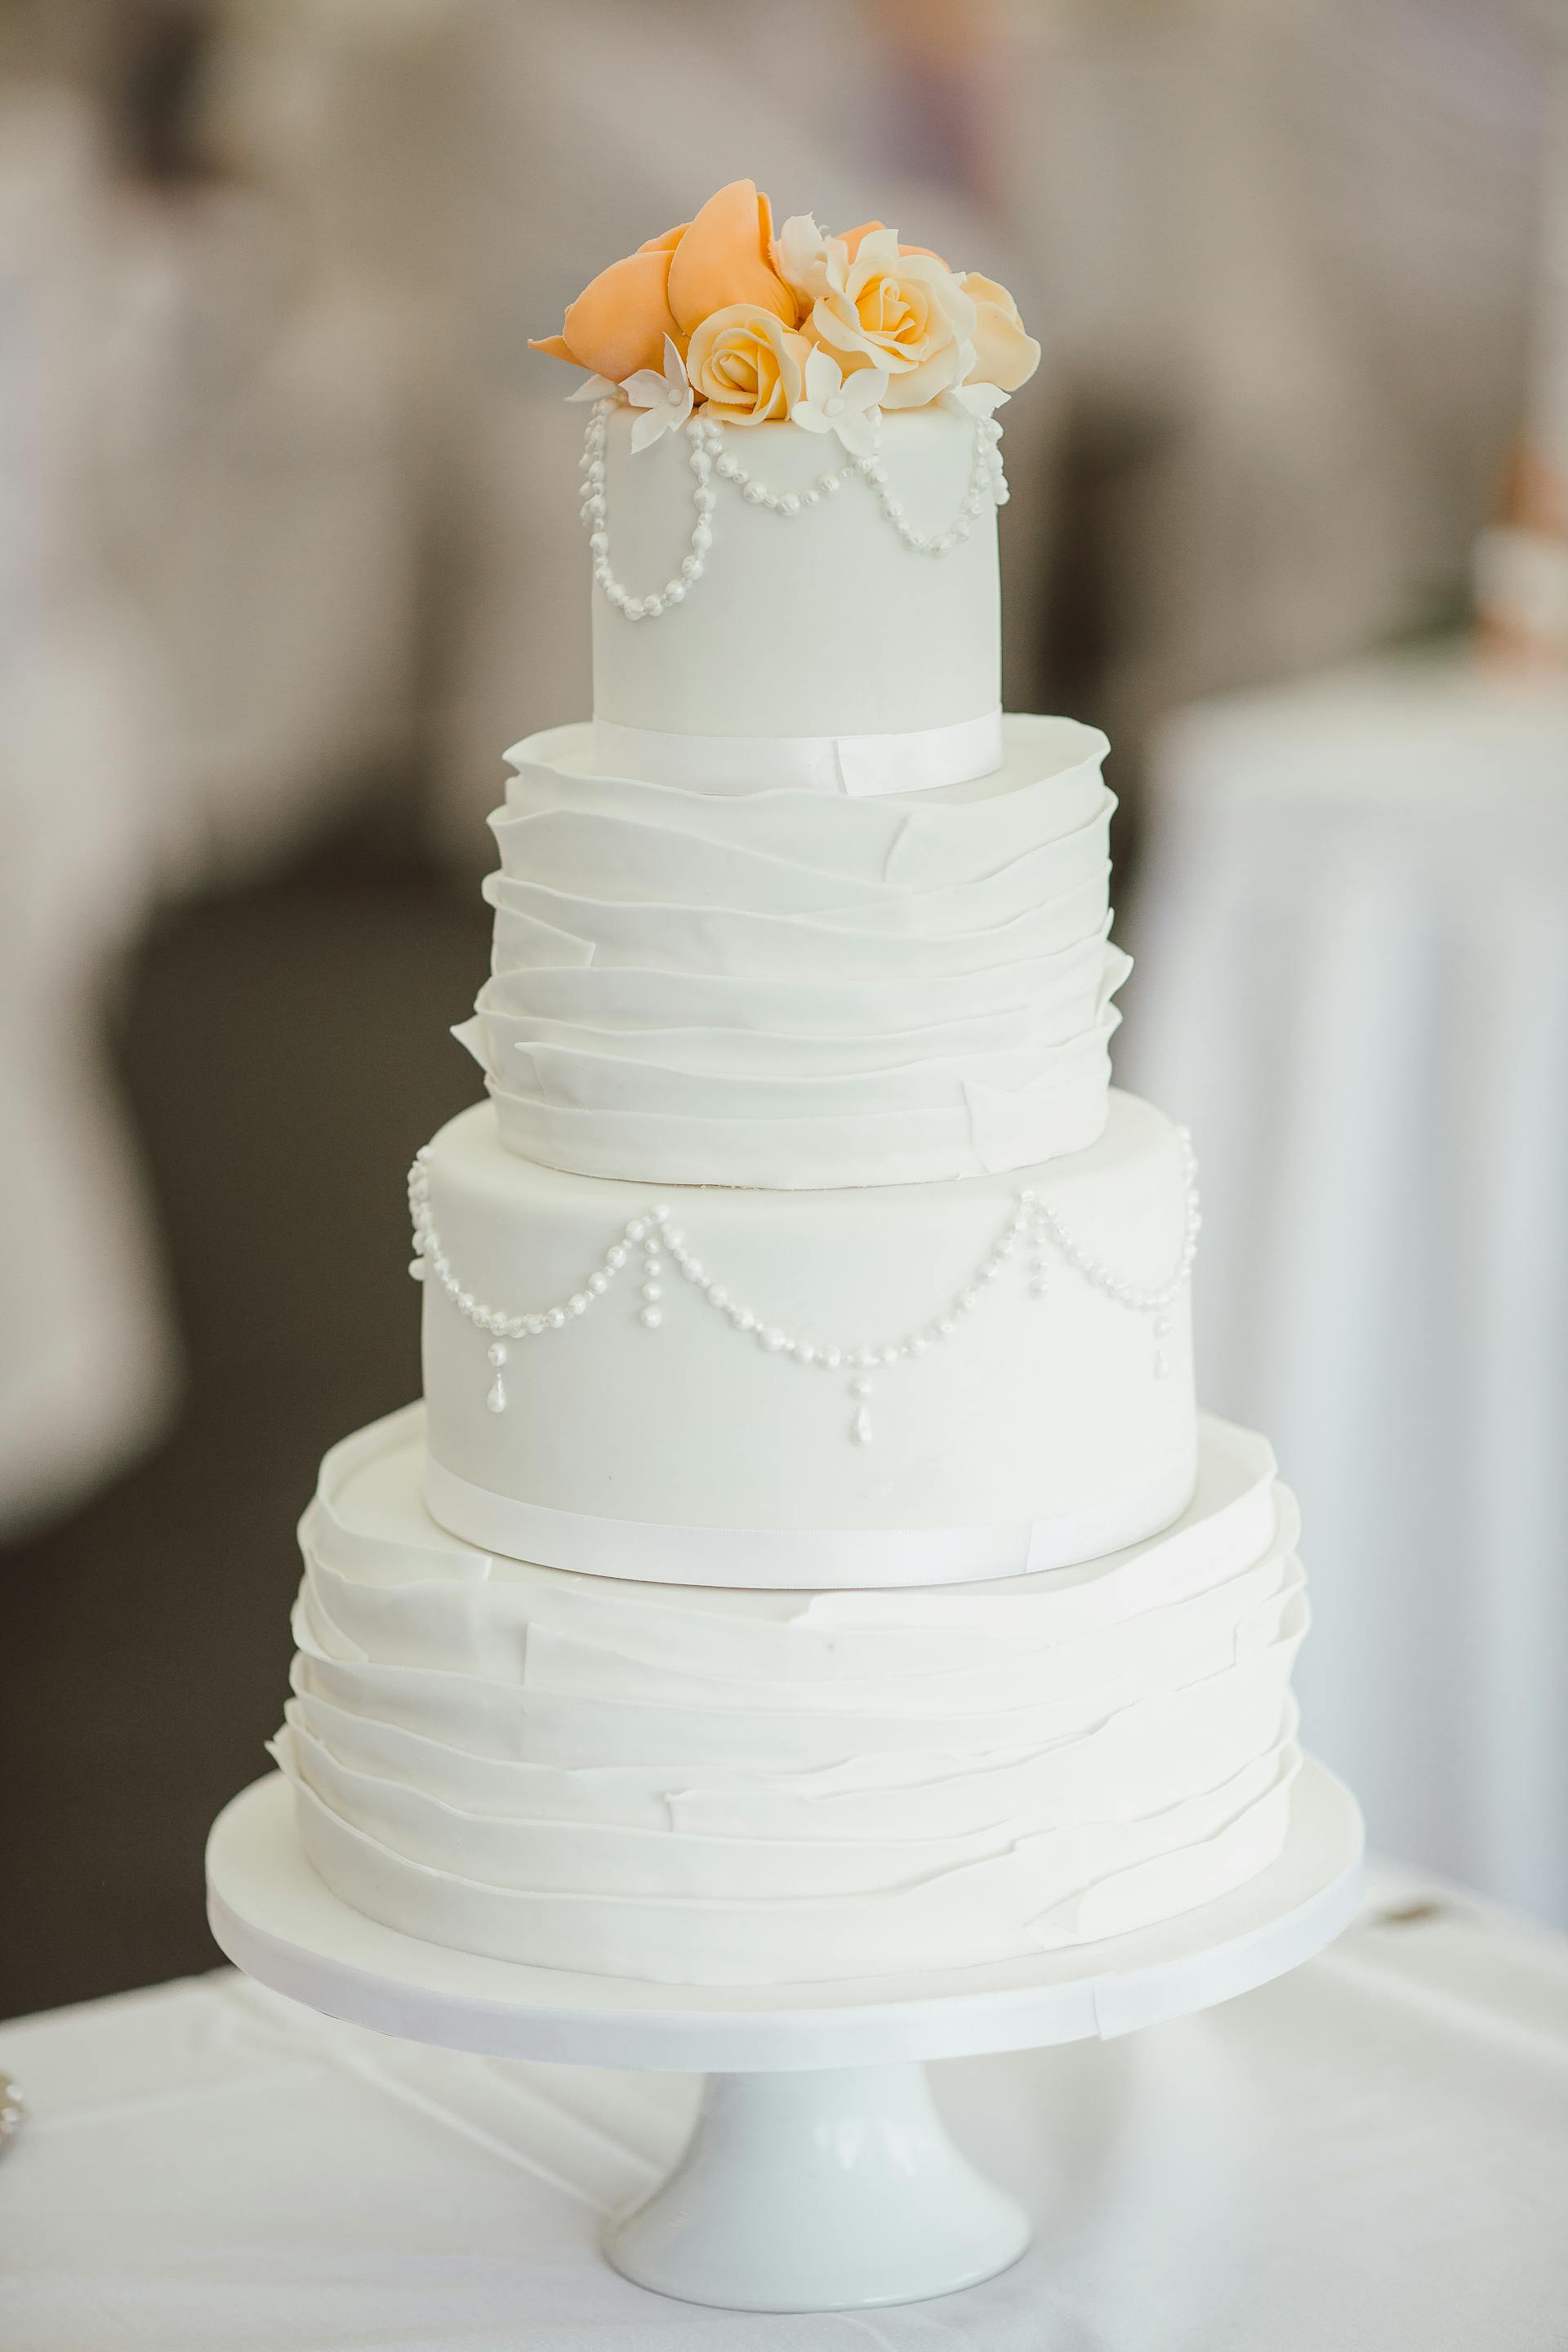 A four-tiered cake on a cake stand | Source: Pexels